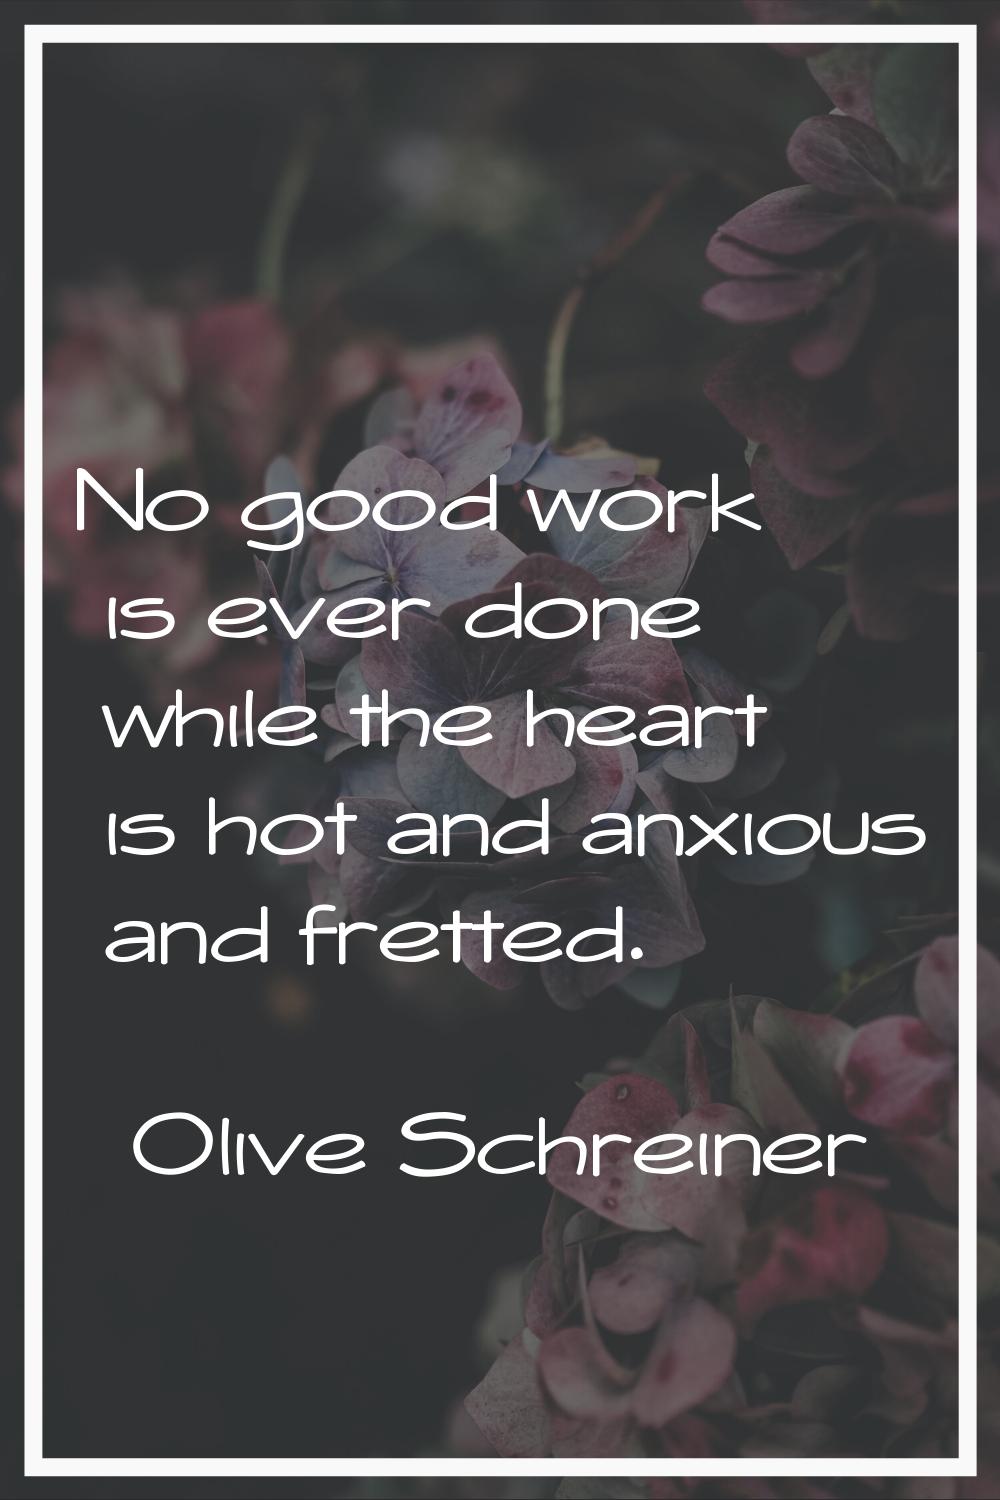 No good work is ever done while the heart is hot and anxious and fretted.